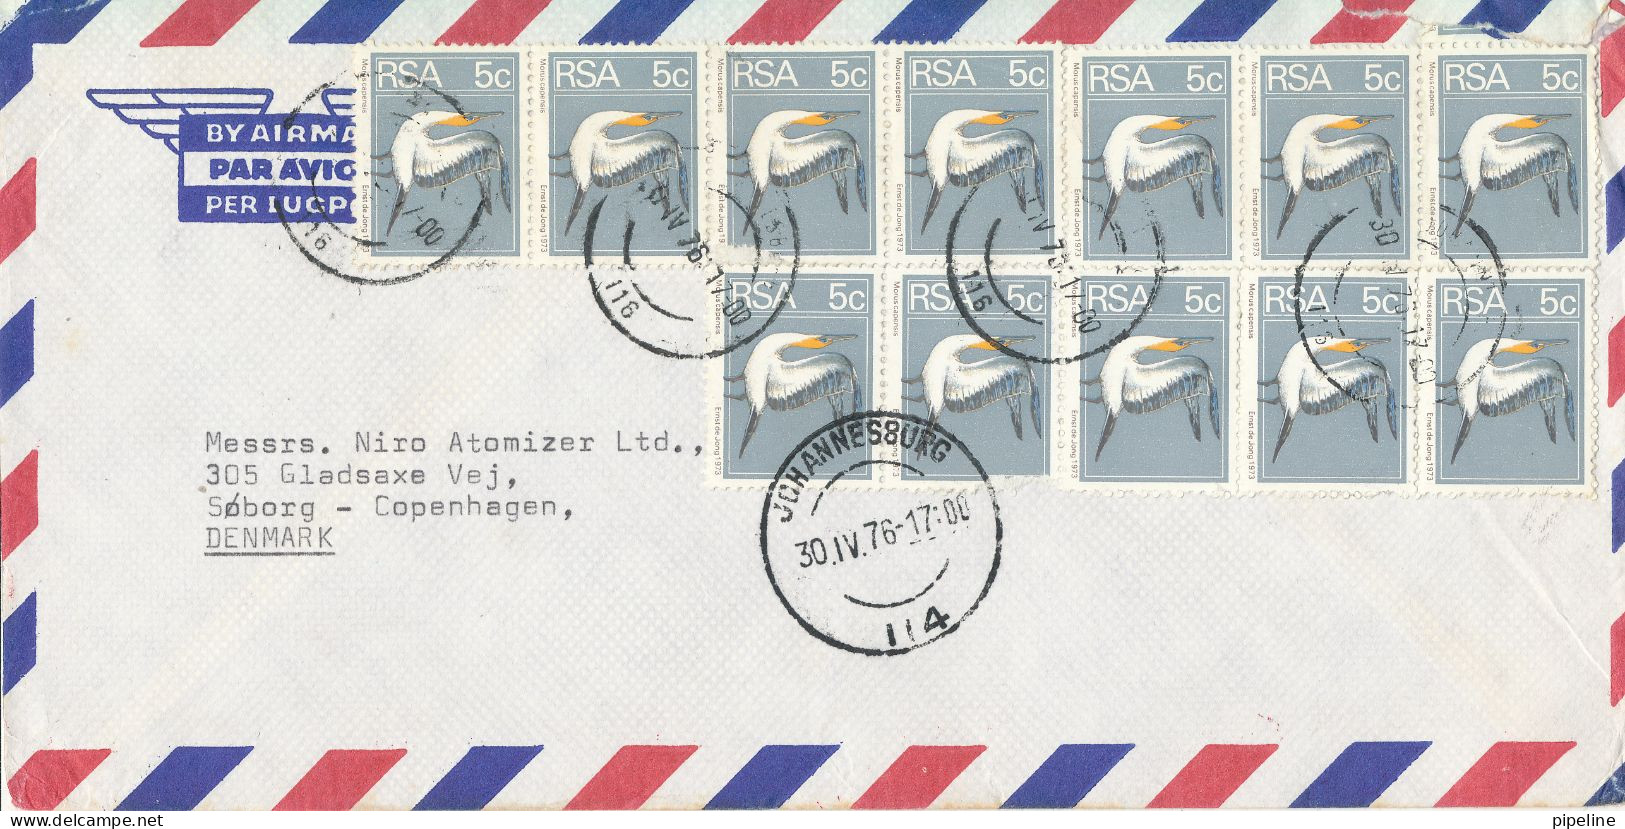 South Africa RSA Air Mail Cover Sent To Denmark 30-4-1976 With A Lot Of BIRD Stamps - Airmail